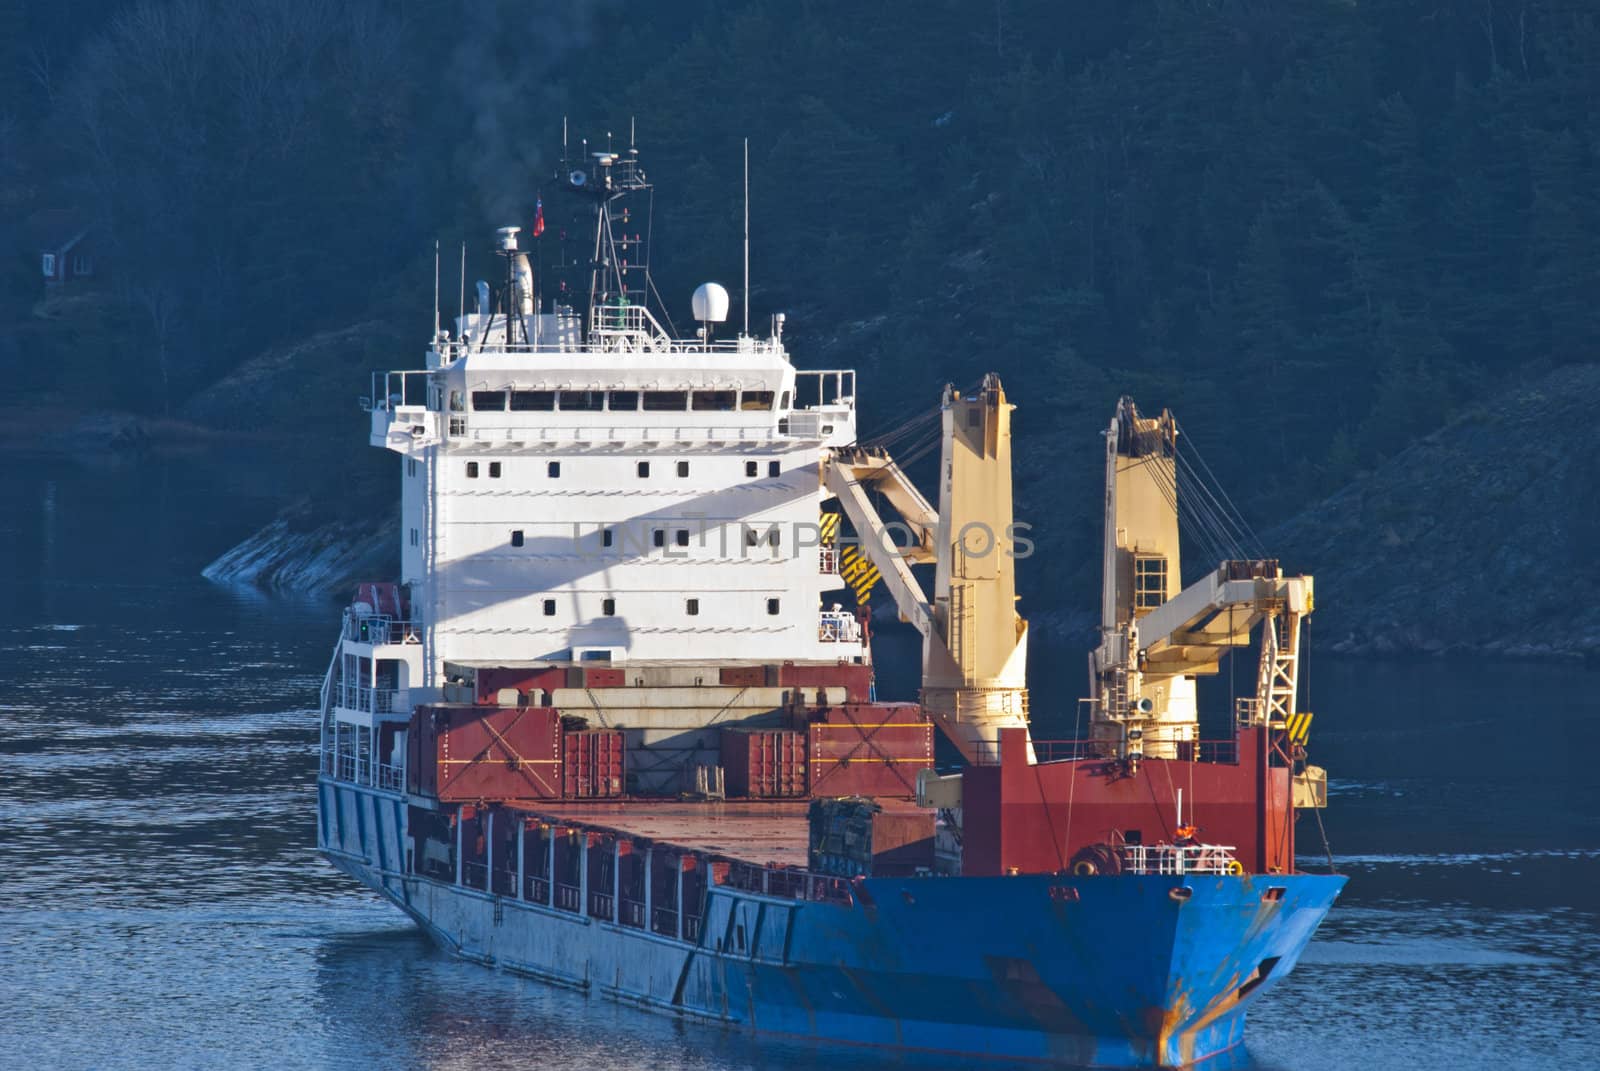 large vessels in ringdalsfjord, image 9 by steirus